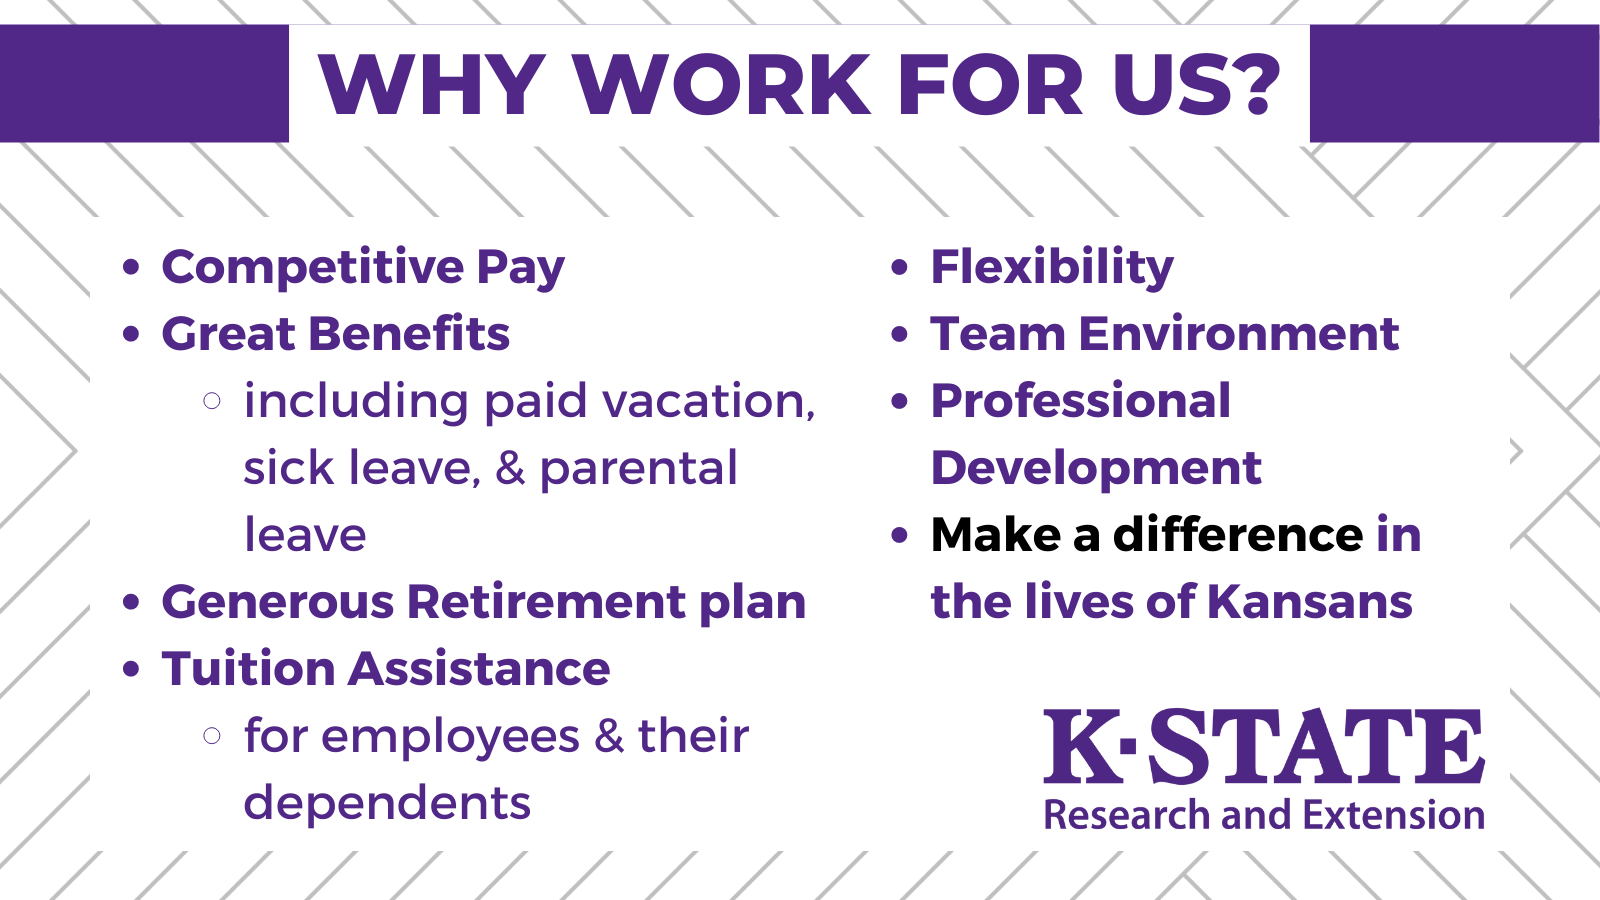 Why work for K-State Research and Extension? 1. competitive pay; 2. Great benefits (including paid vacation, sick leave, & parental leave); 3. Generous Retirement plan; 4. Tuition Assistance (for employees & dependents); 5. Flexibility; 6. Team Environment; 7. Professional Development; 8. Make a difference in the lives of Kansans.